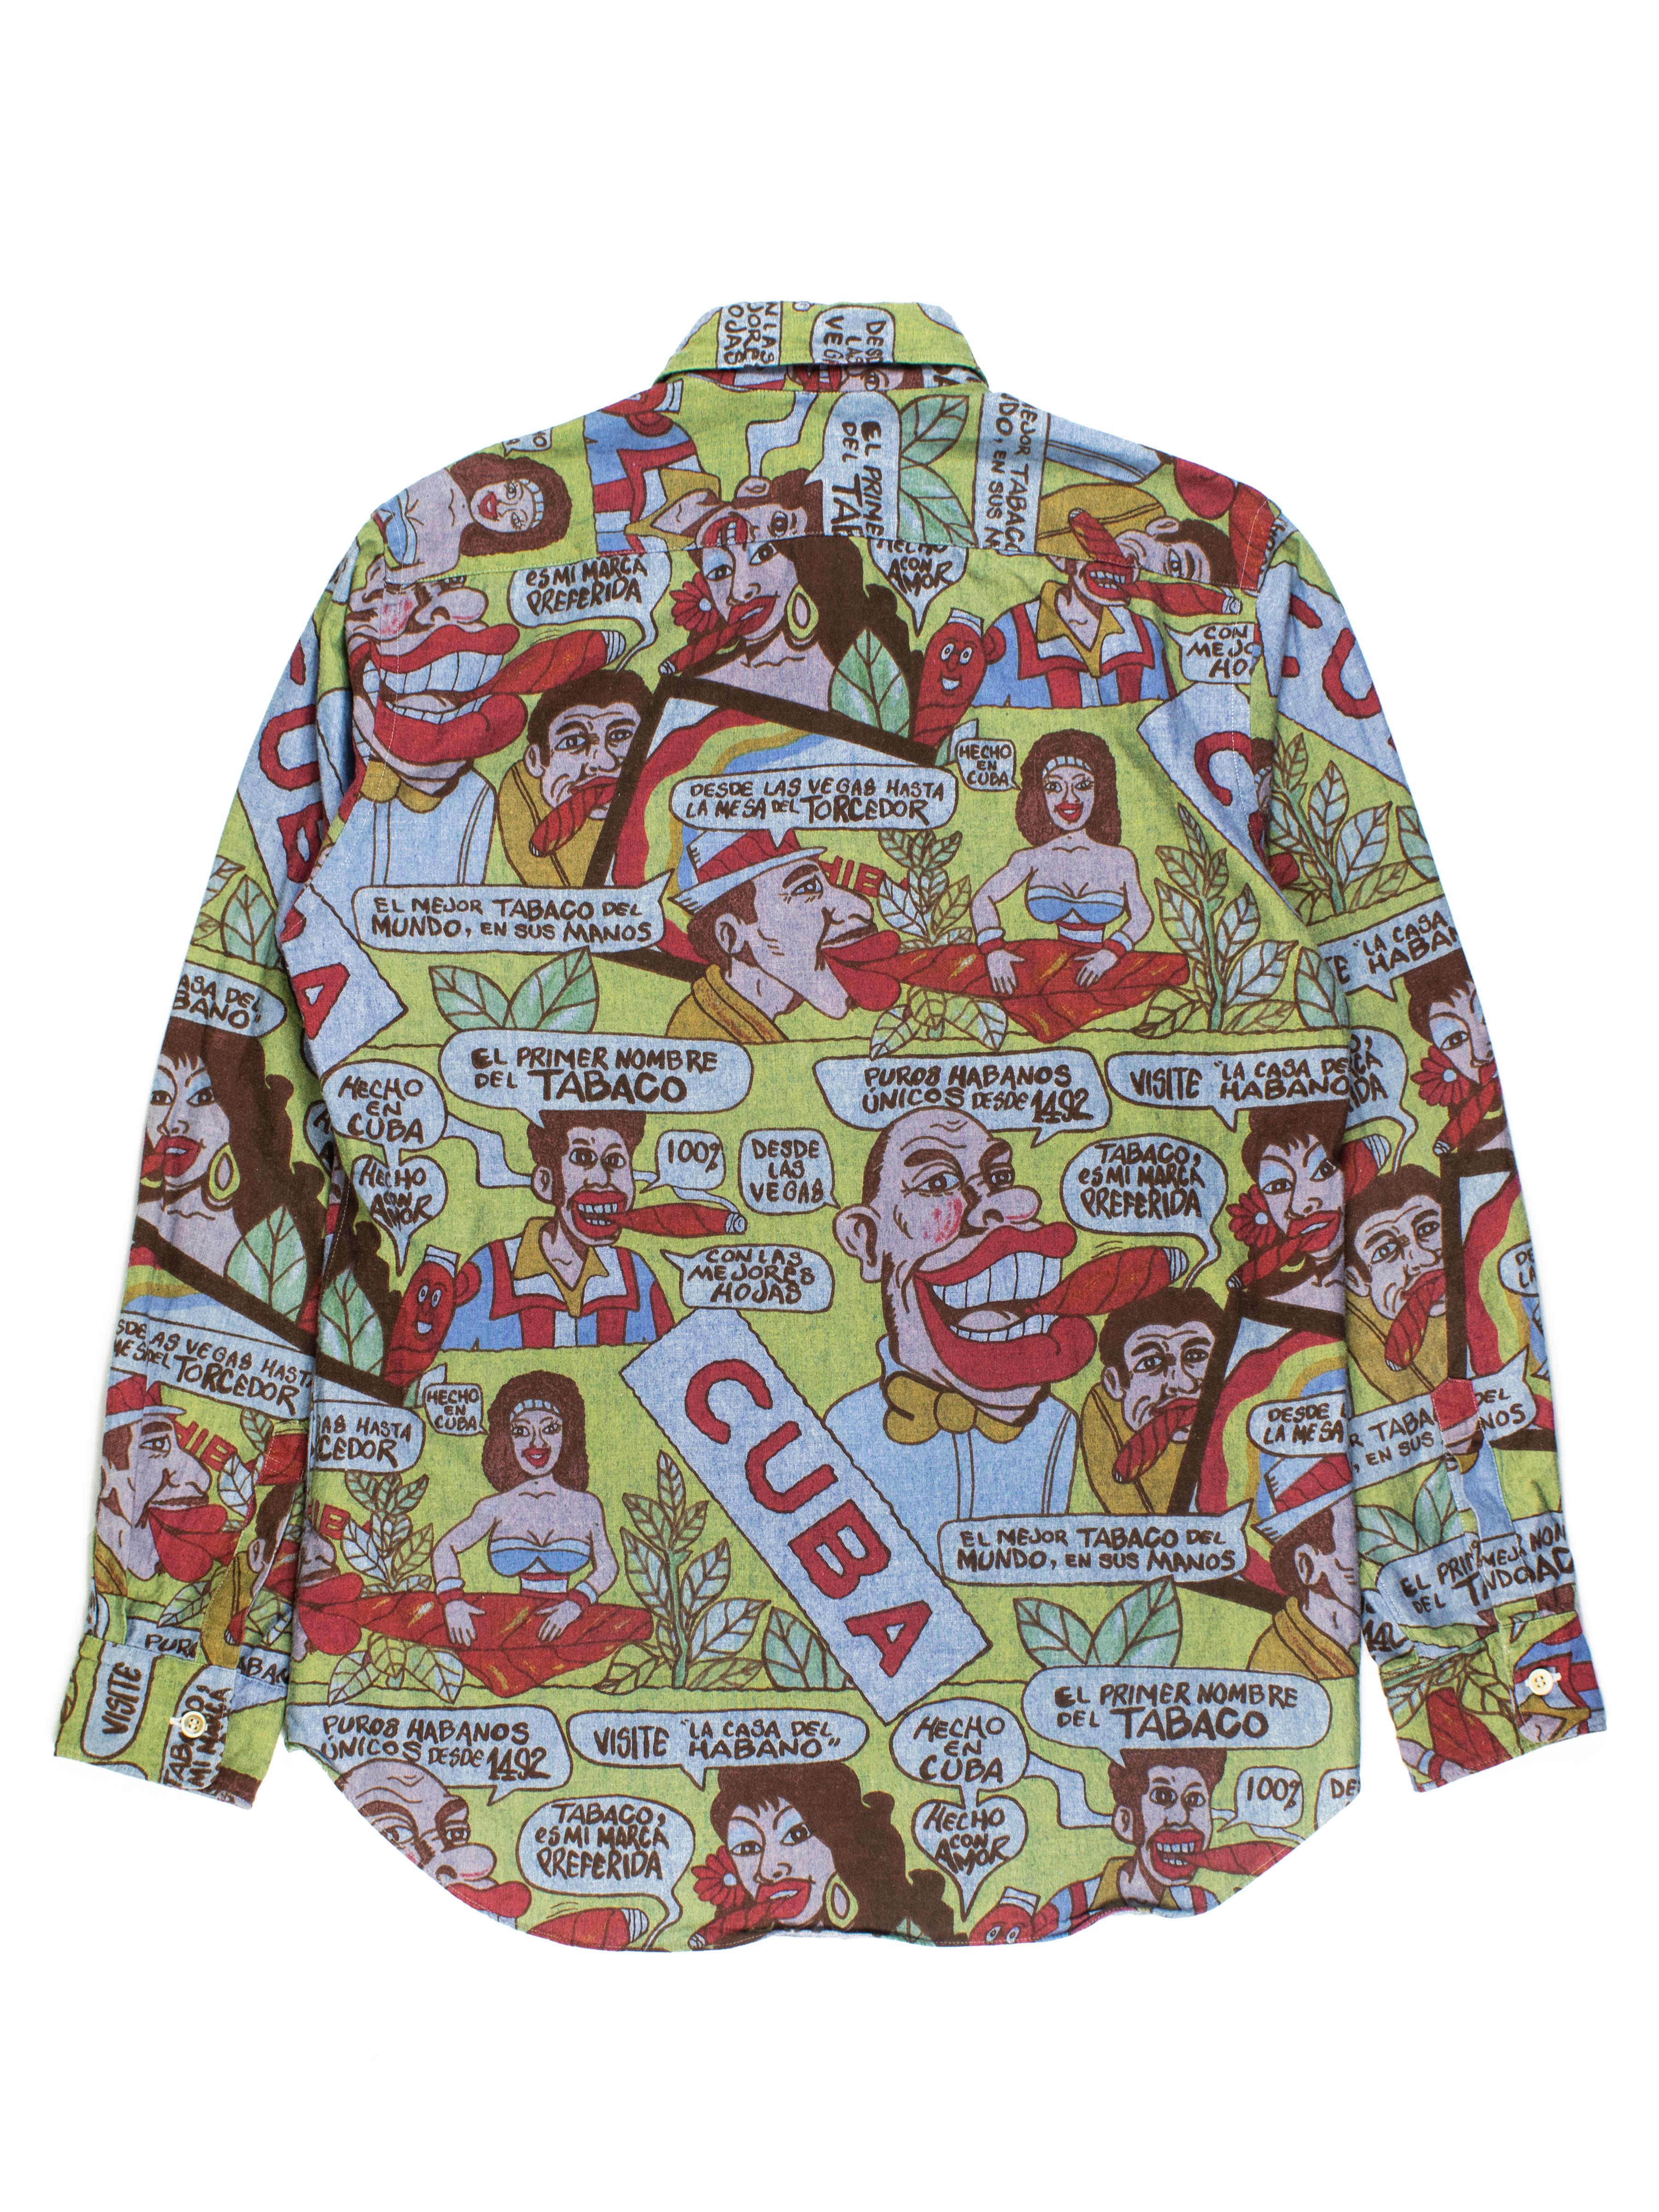 This broadcloth cotton top employs a tropical color scheme and vintage comic book-style Cuban iconography to depict various interactions revolving around cigars - a symbol of pseudo-illicit luxury during the embargo (U.S. president John F. Kennedy